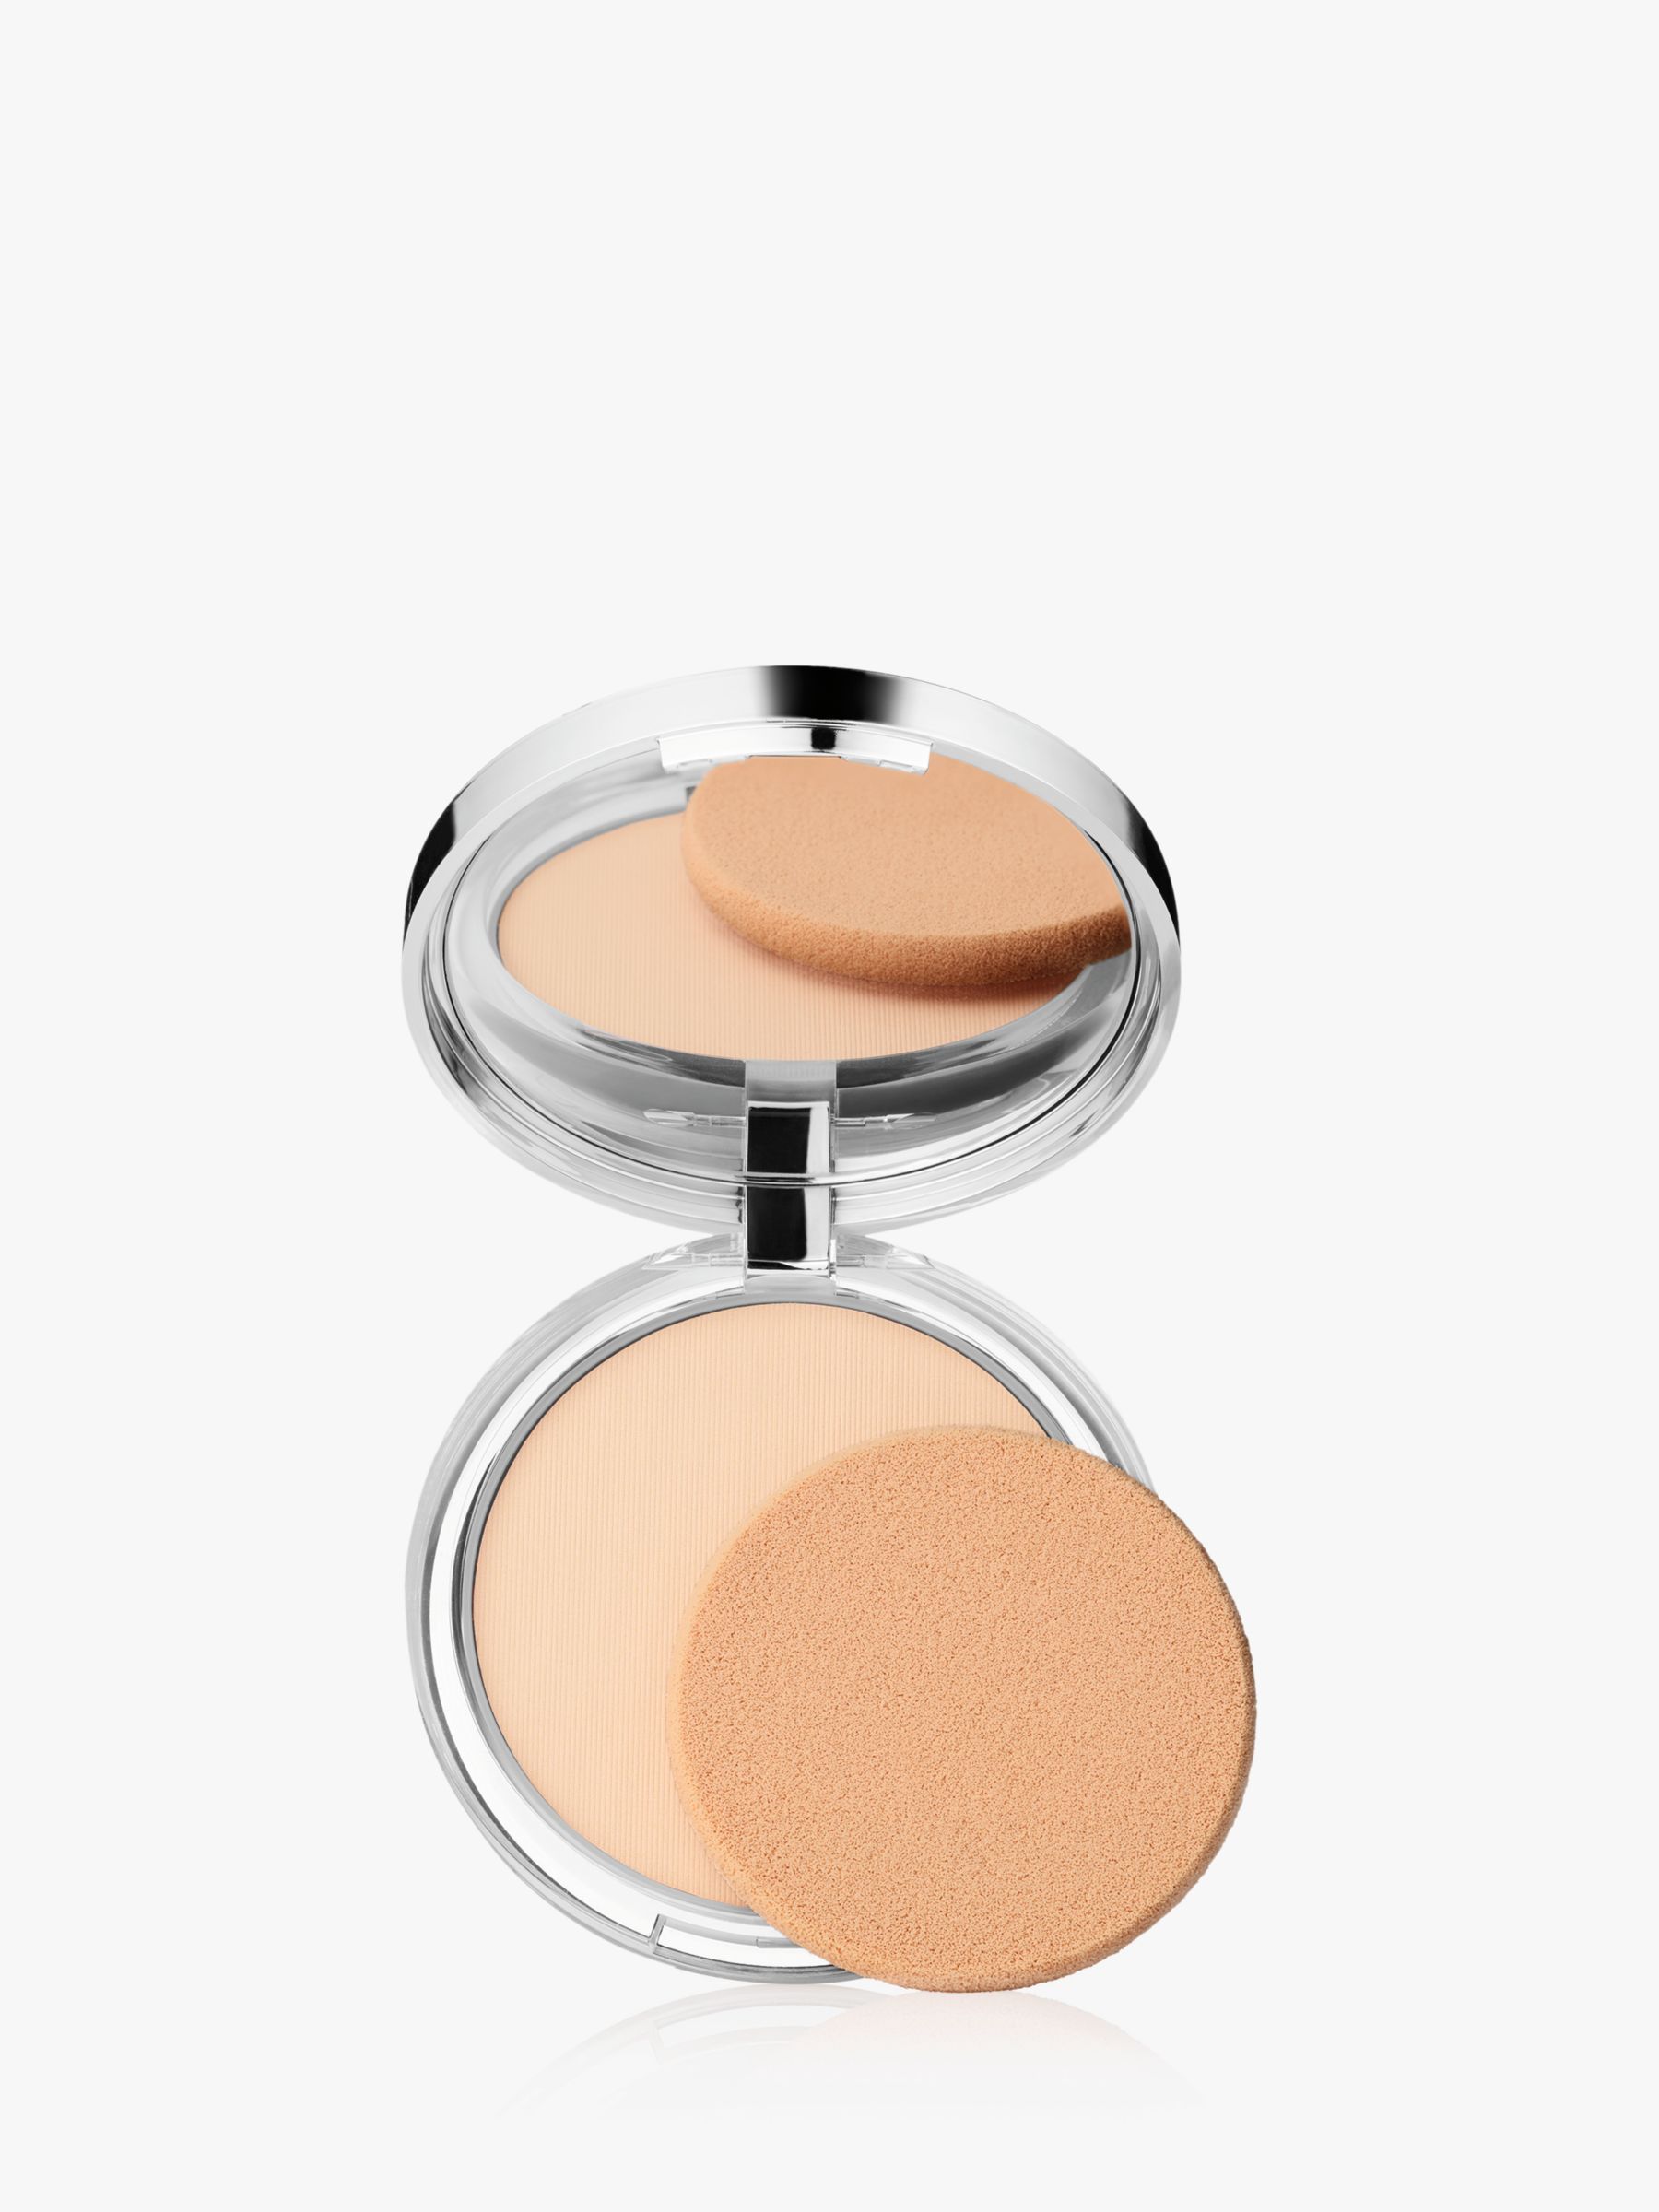 Clinique Stay-Matte Sheer Pressed Powder Oil-Free, Stay Buff 1